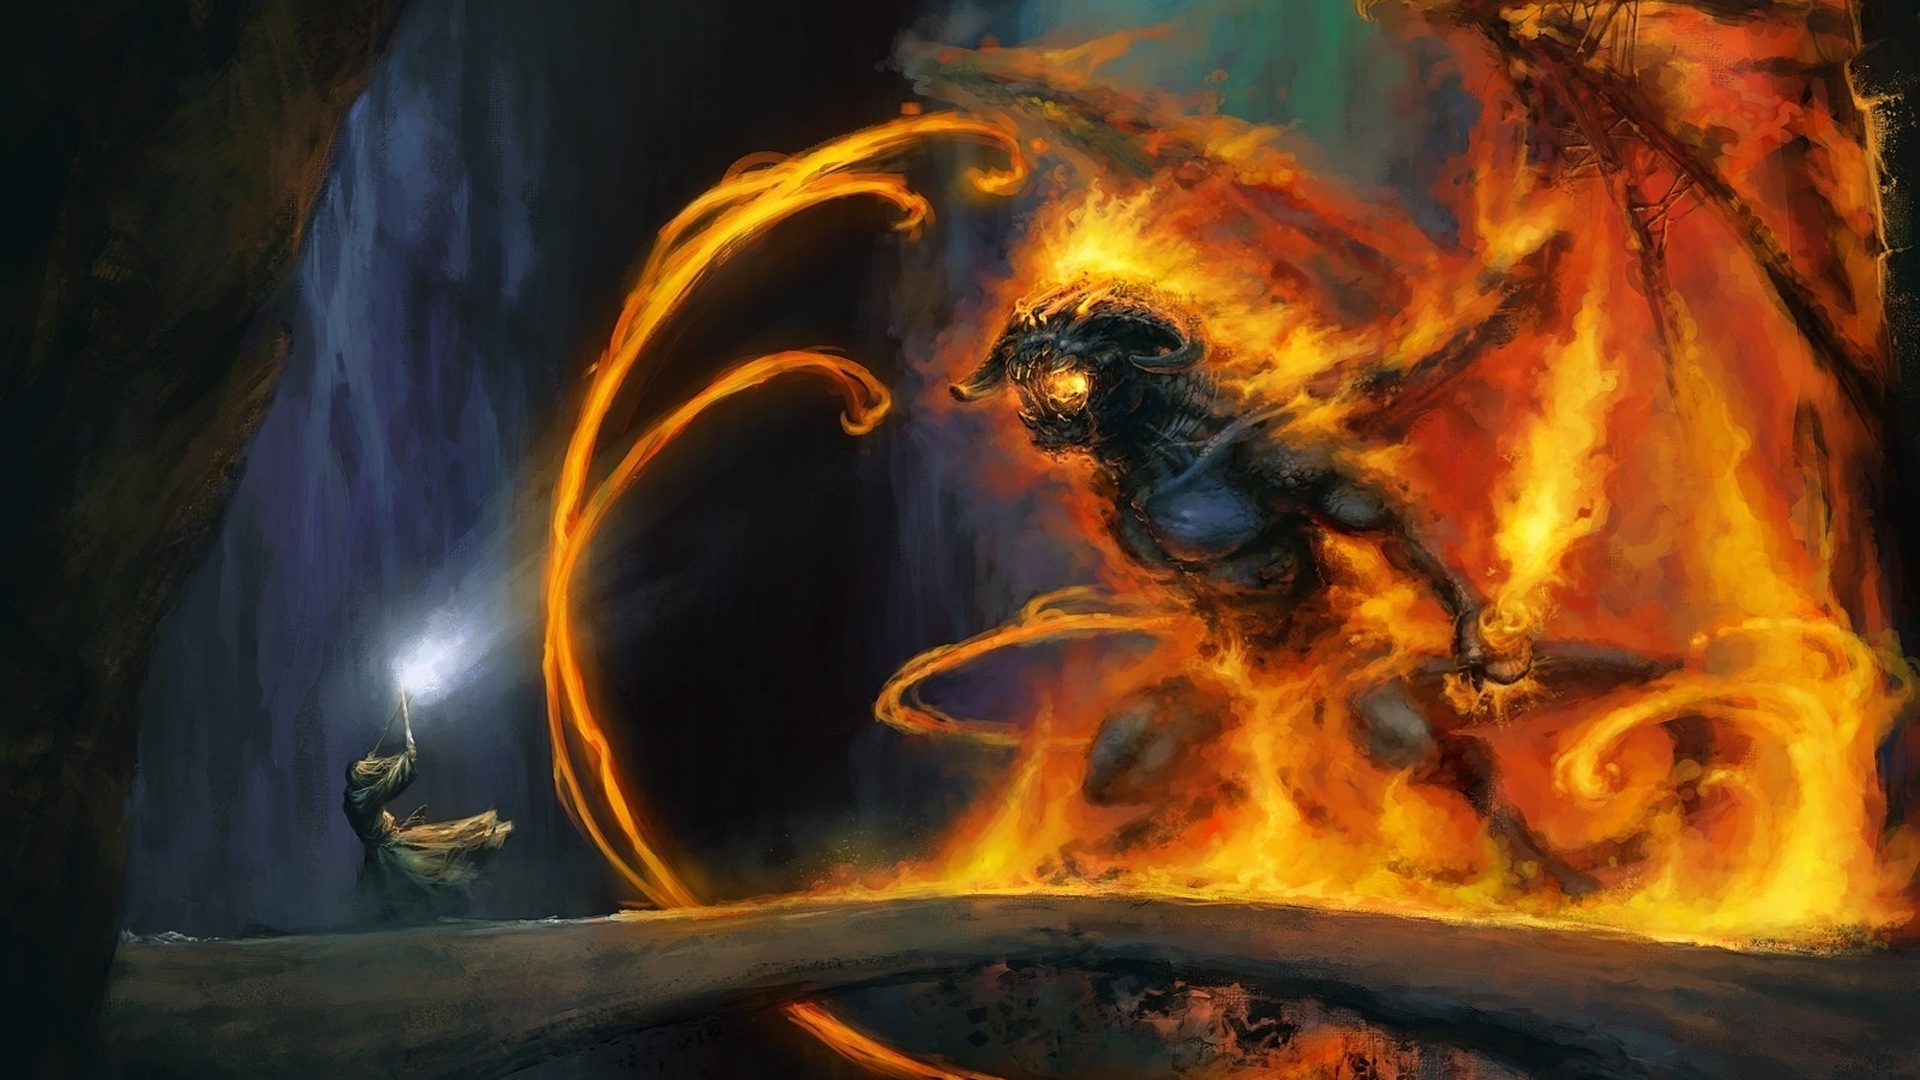 Wizard Demon Gandalf Lord Of The Rings Balrog Lord Of The Rings Painting 1920x1080